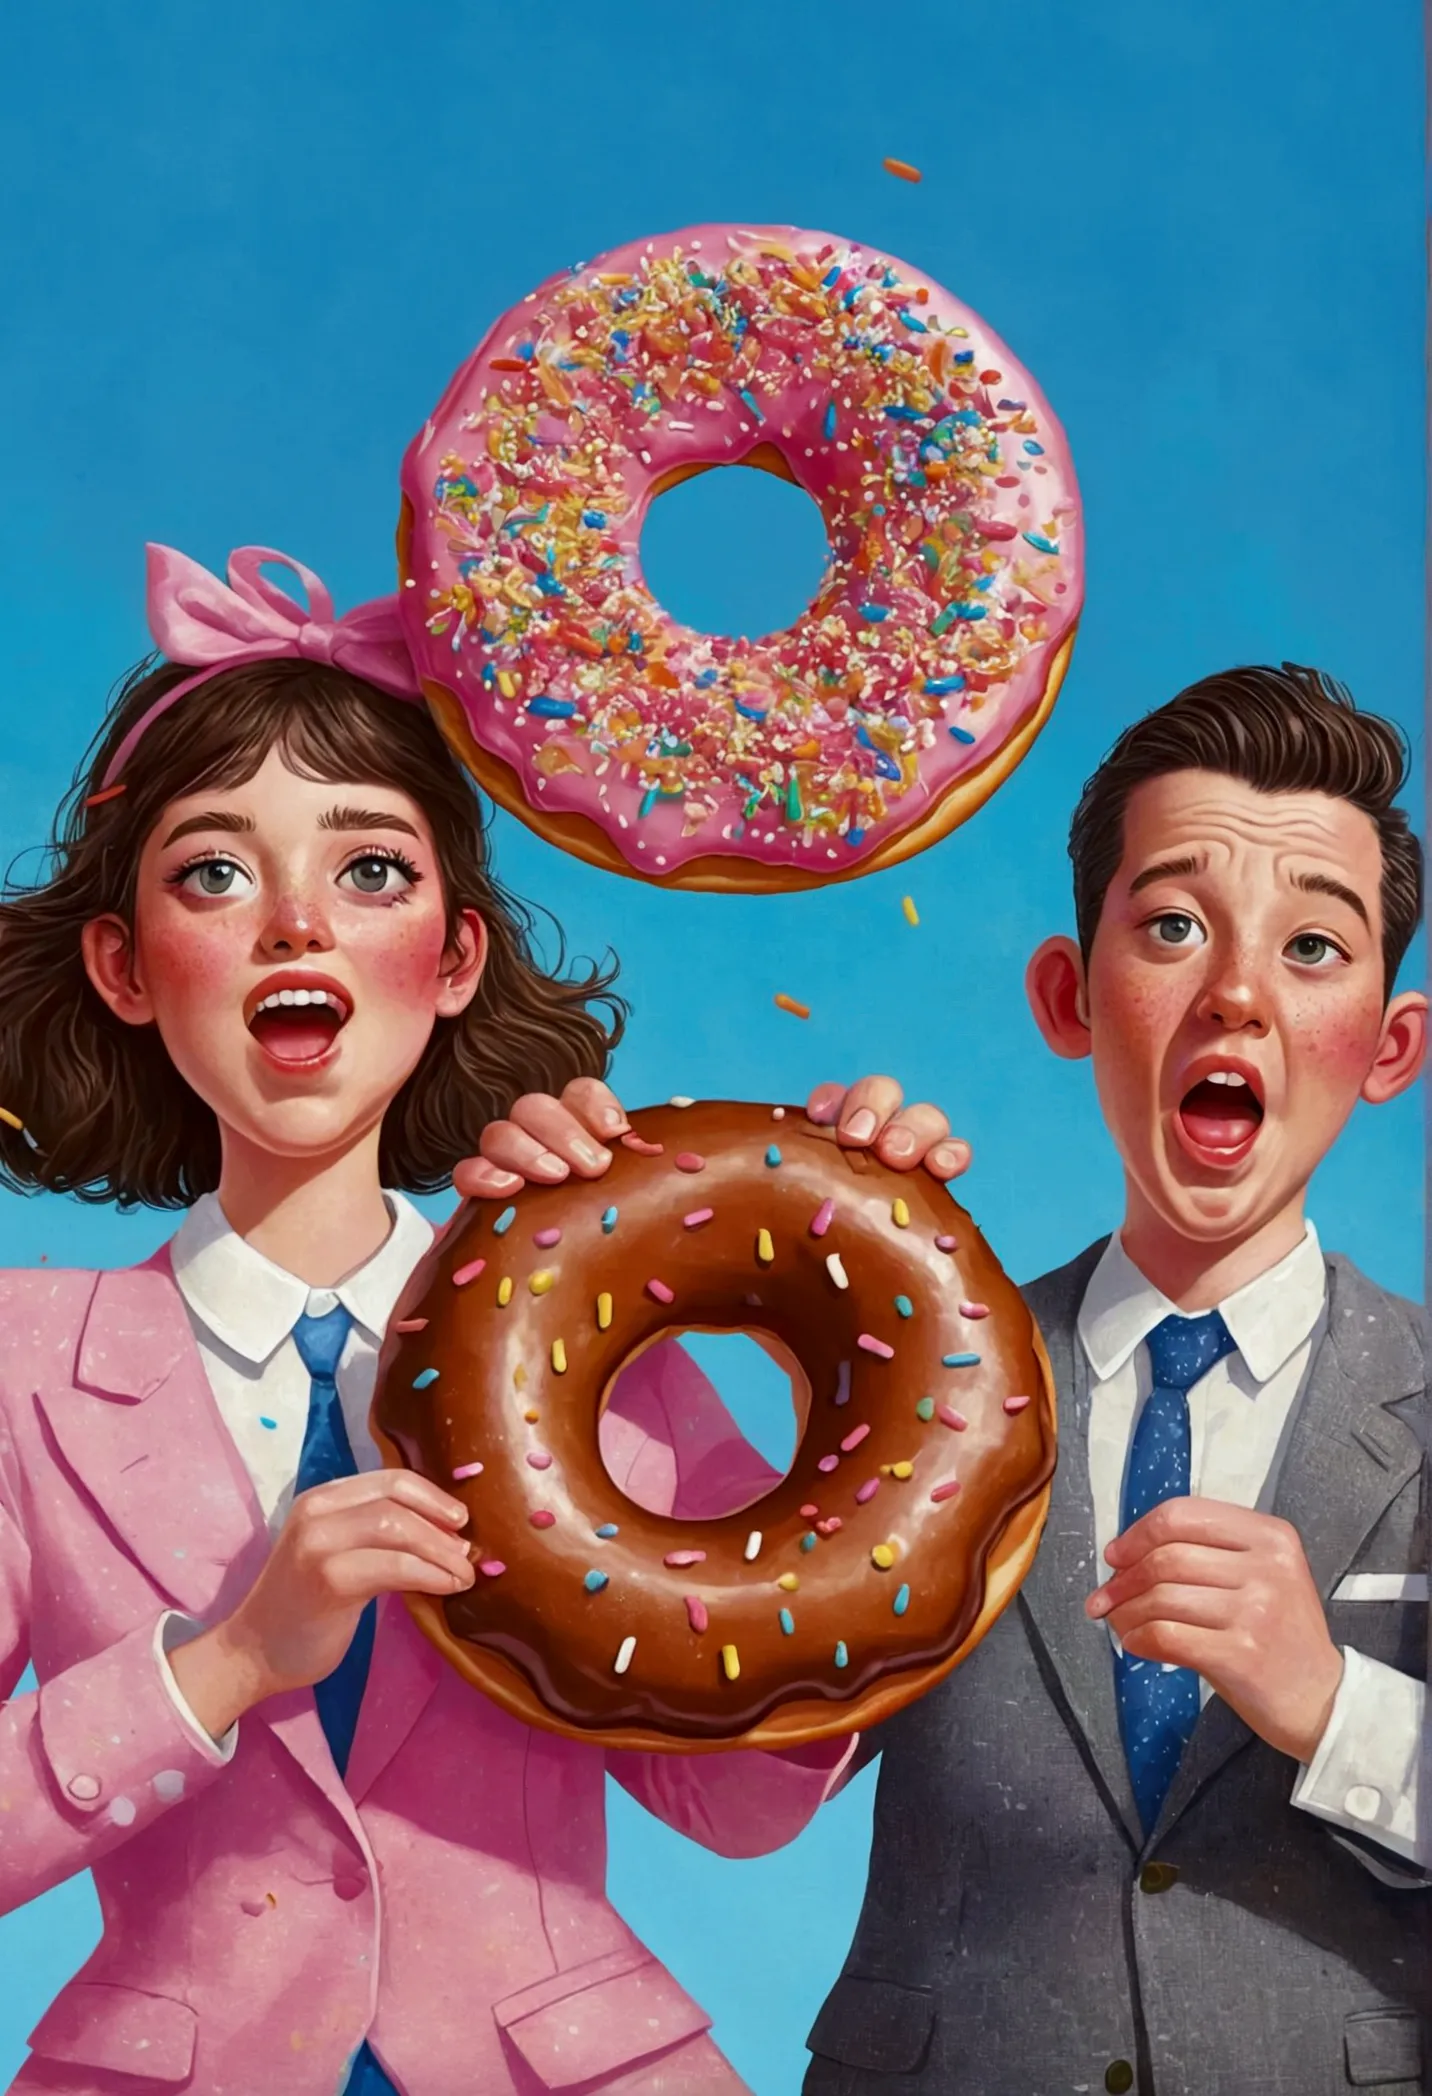 they are running and holding a donut with sprinkles, an illustration of by Trevor Brown, Winner of the Behance competition, Pop ...